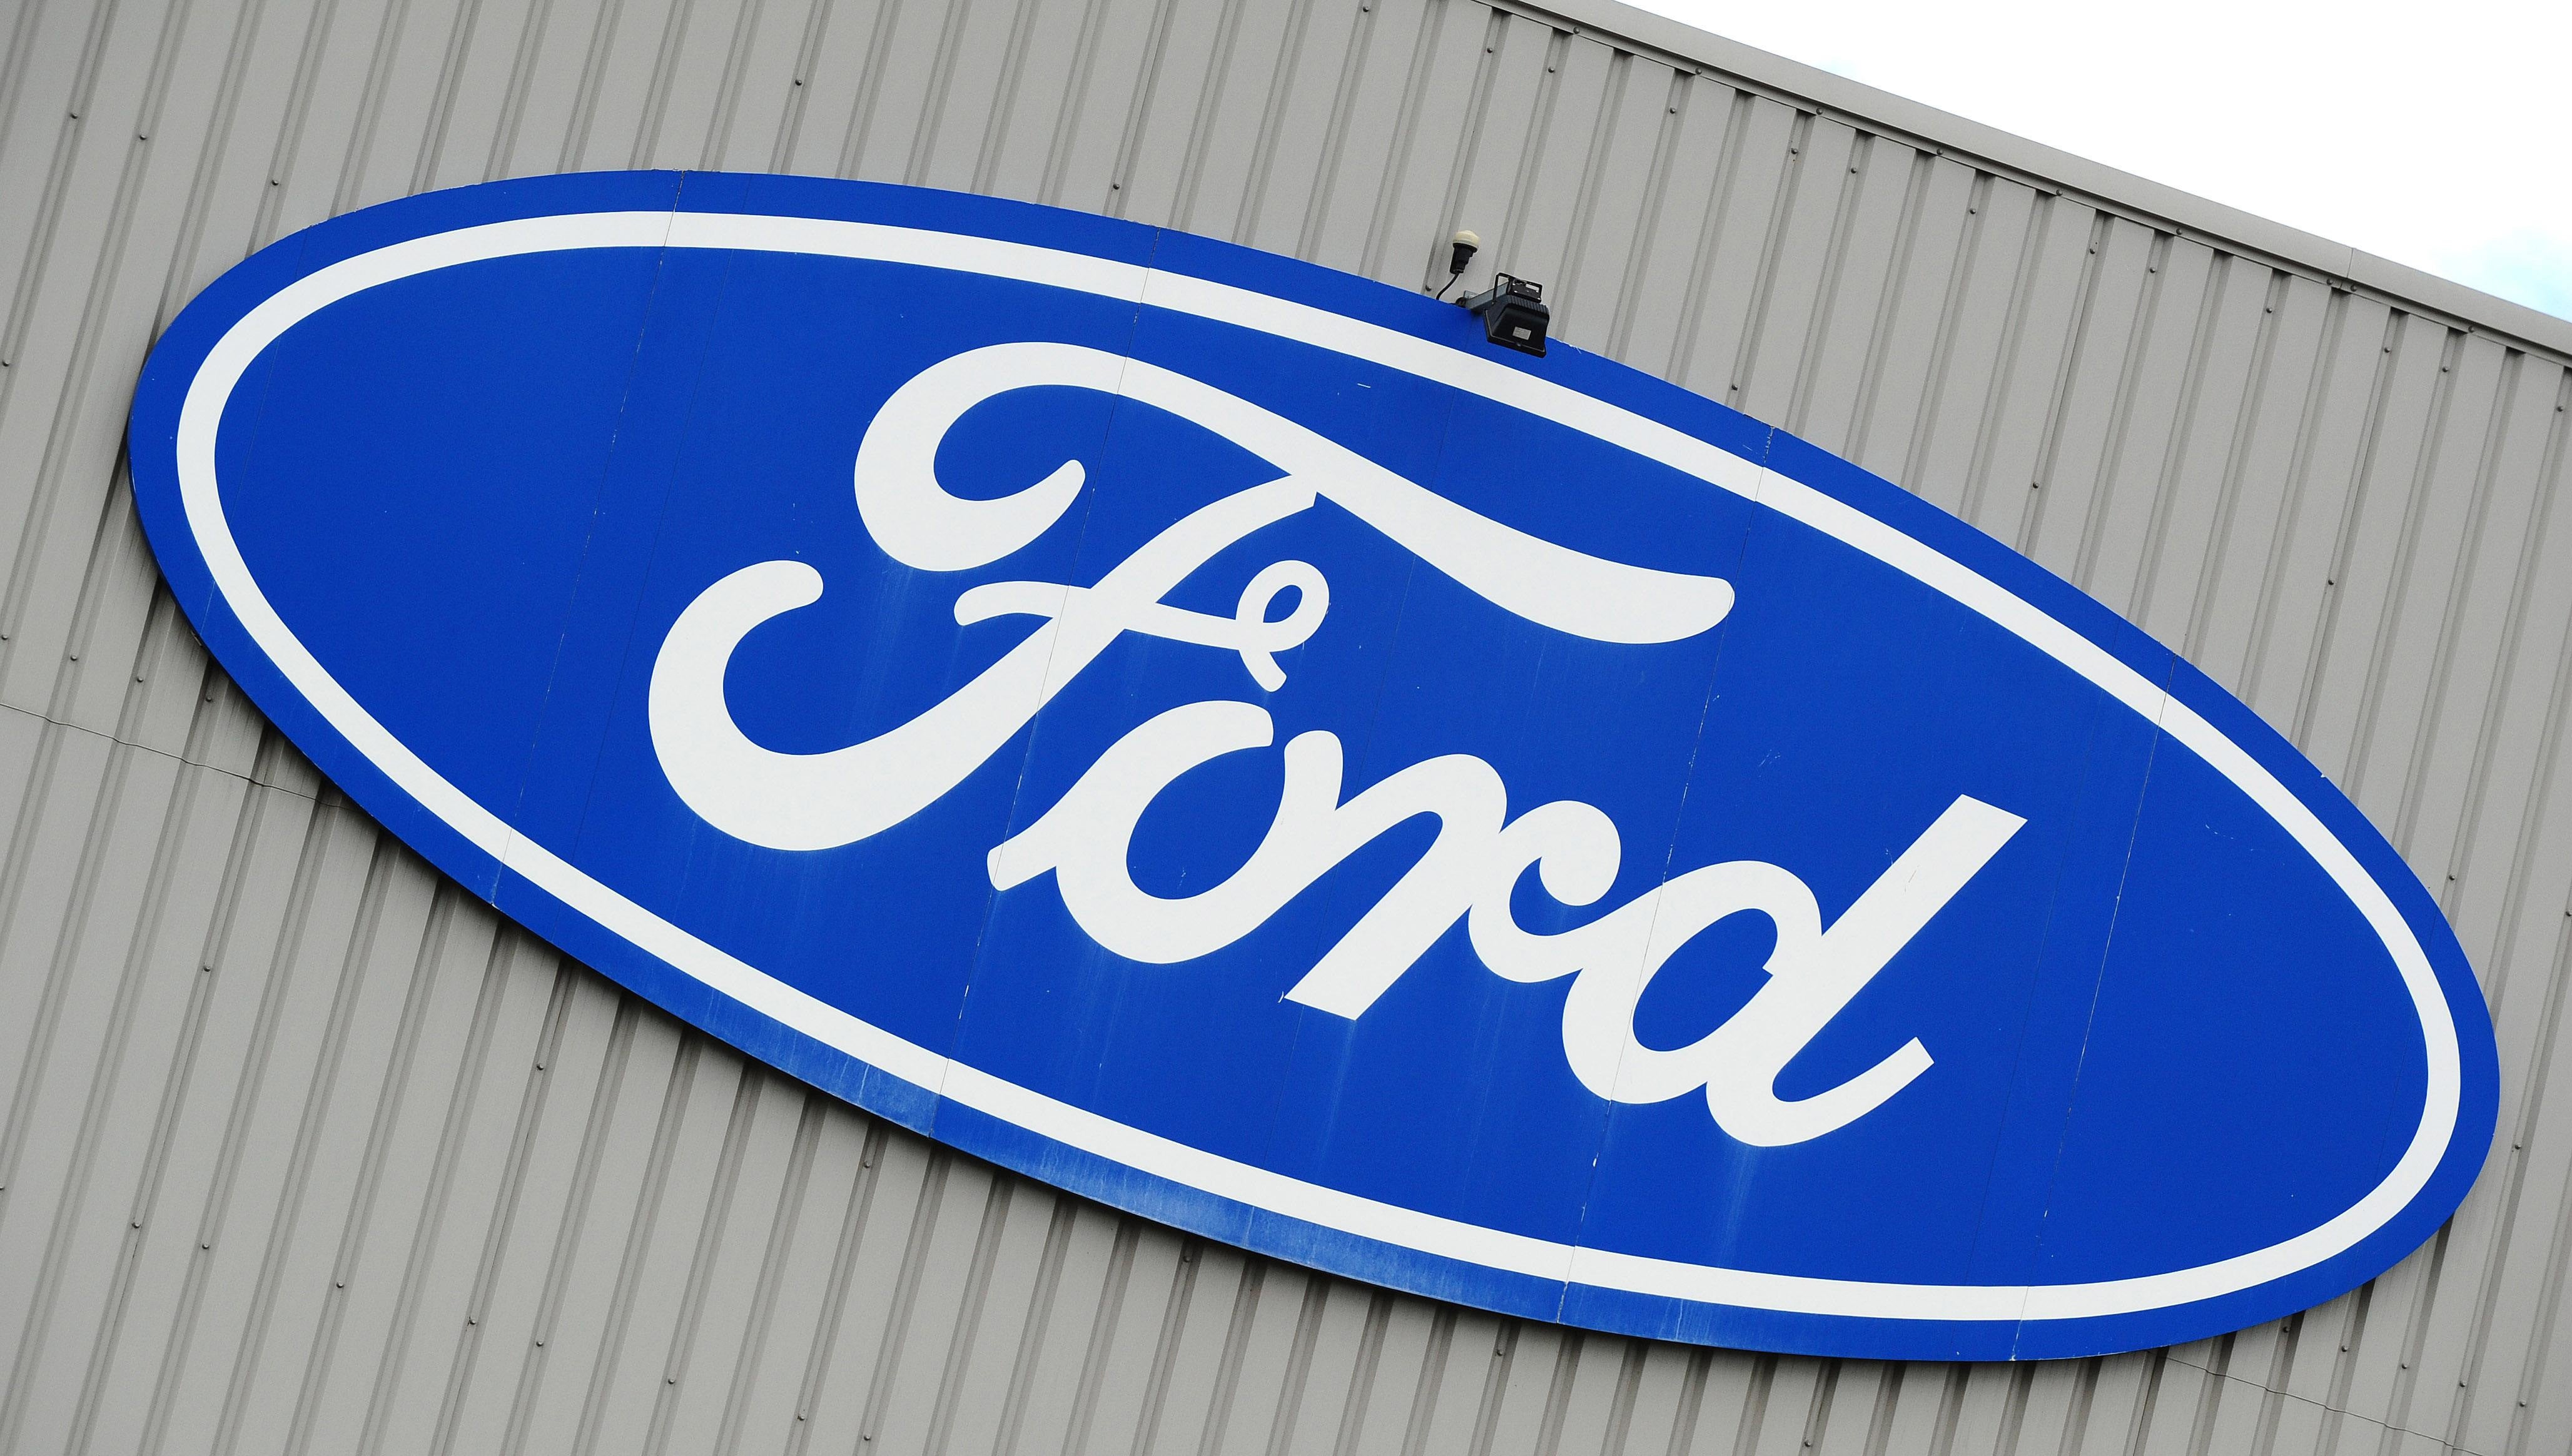 Ford has announced it will phase out all emissions from its vans in Europe by 2035 (Ian West/PA)